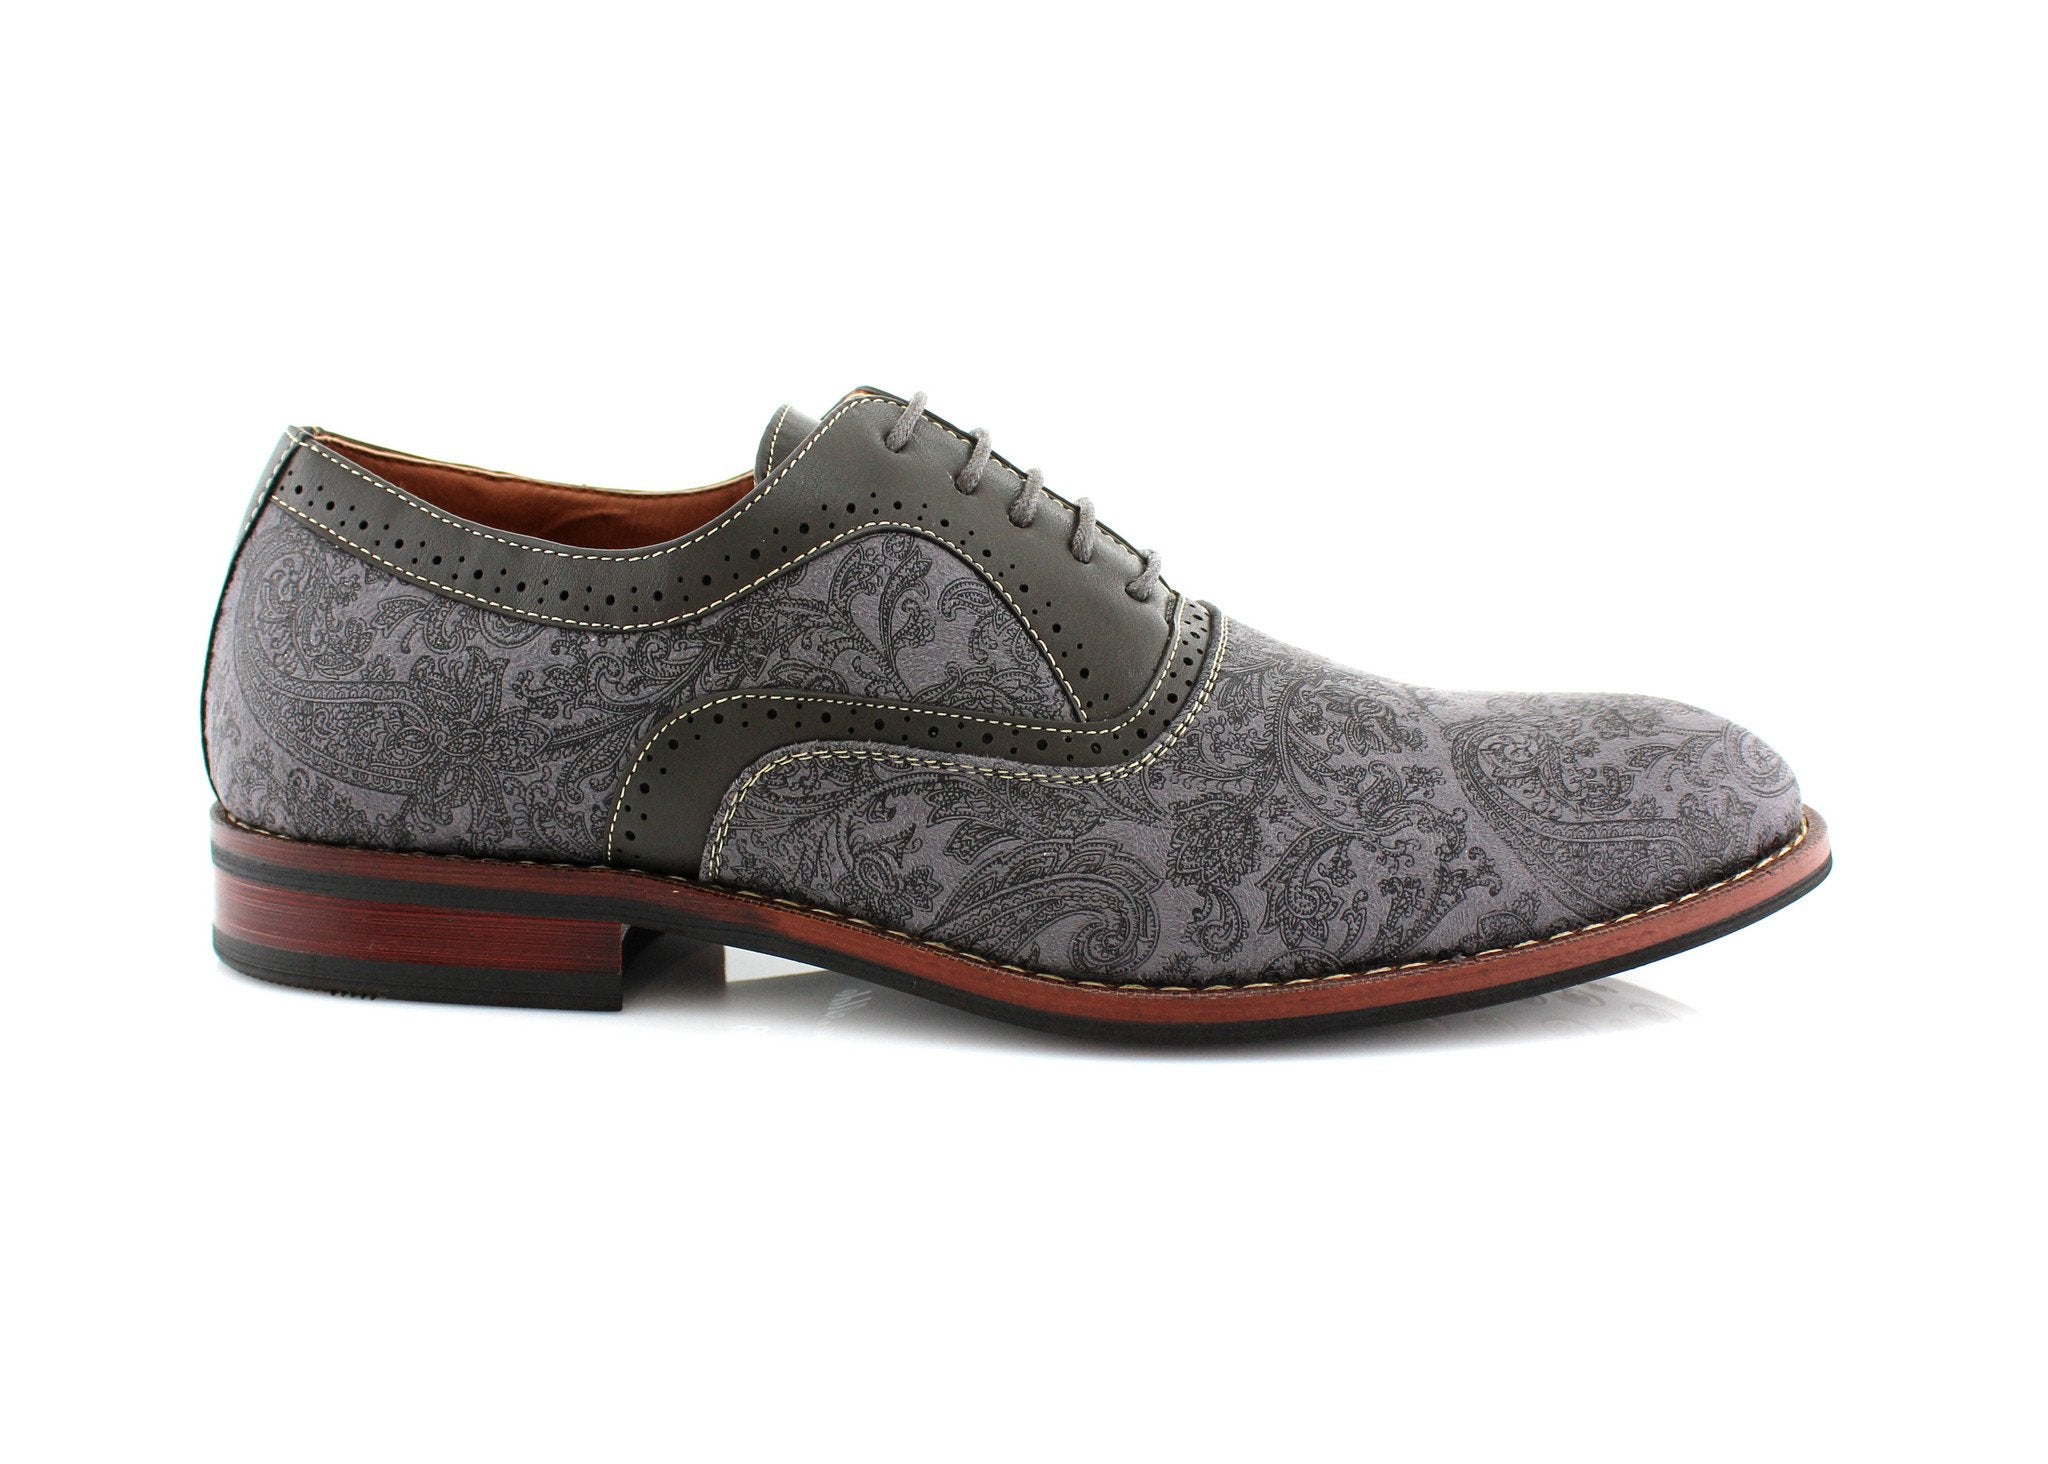 Paisley Pattern Brogue Oxfords | Scott by Ferro Aldo | Conal Footwear | Outer Side Angle View